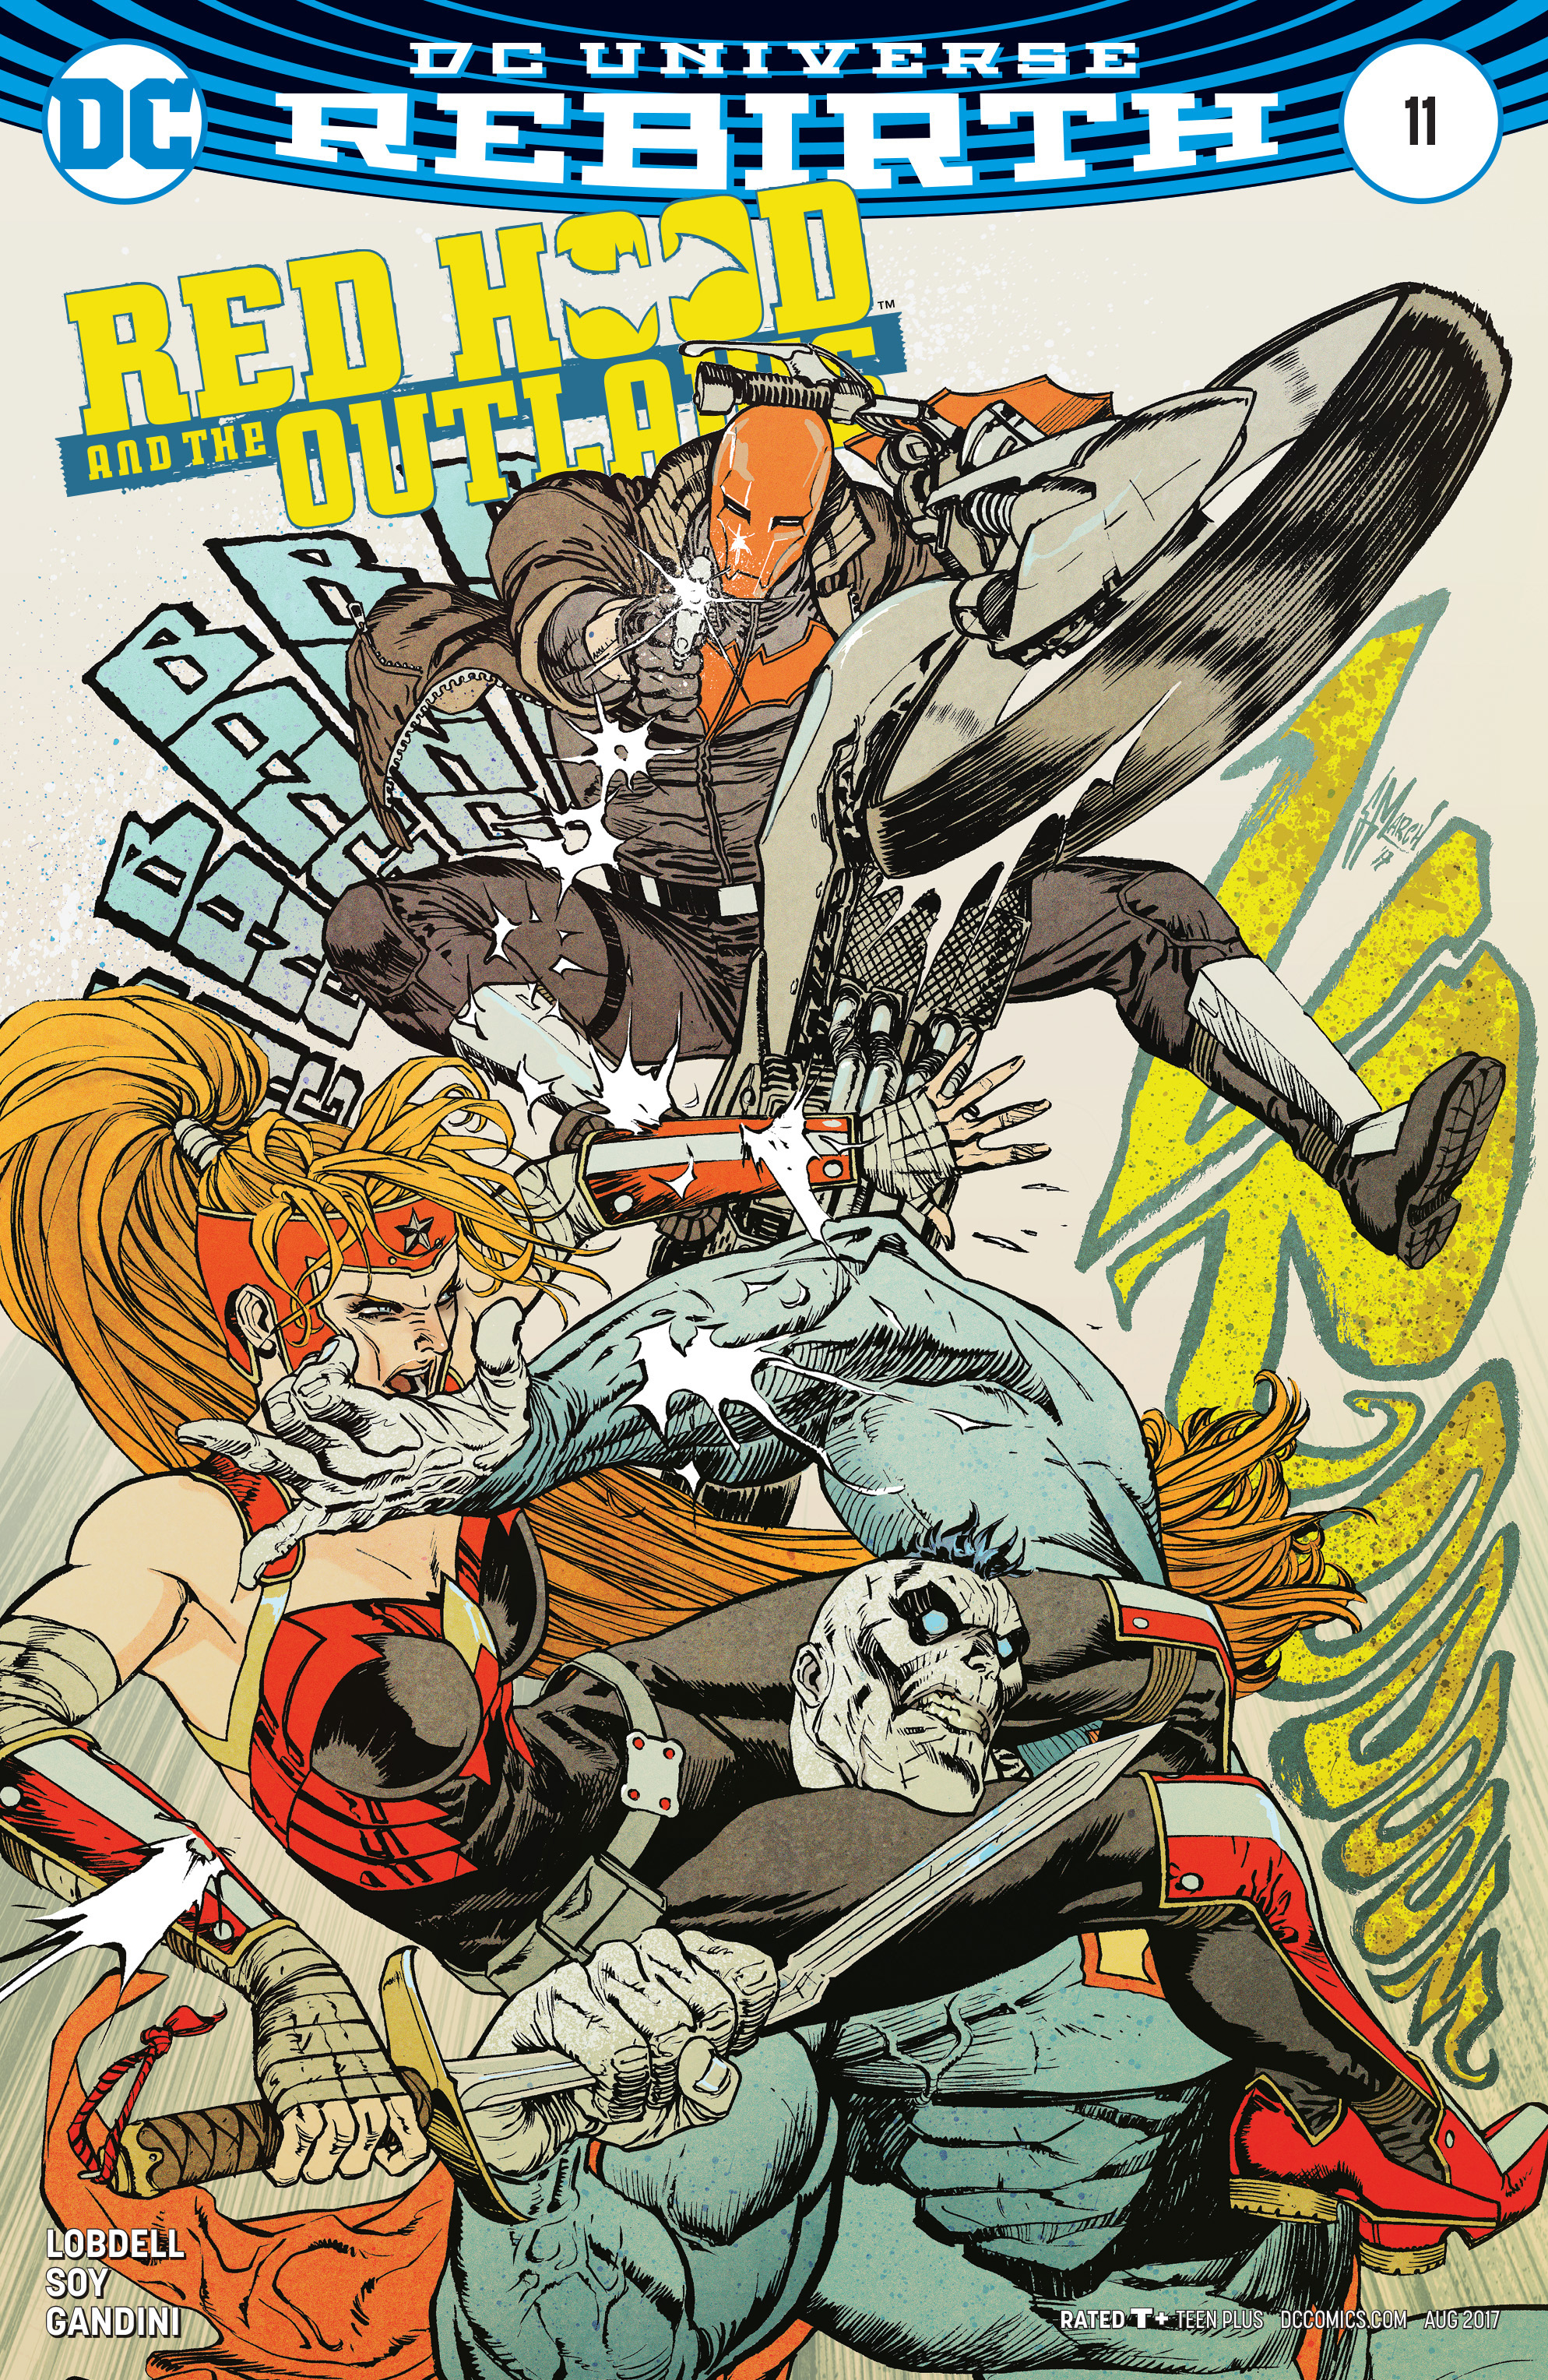 RED HOOD AND THE OUTLAWS #11 VAR ED